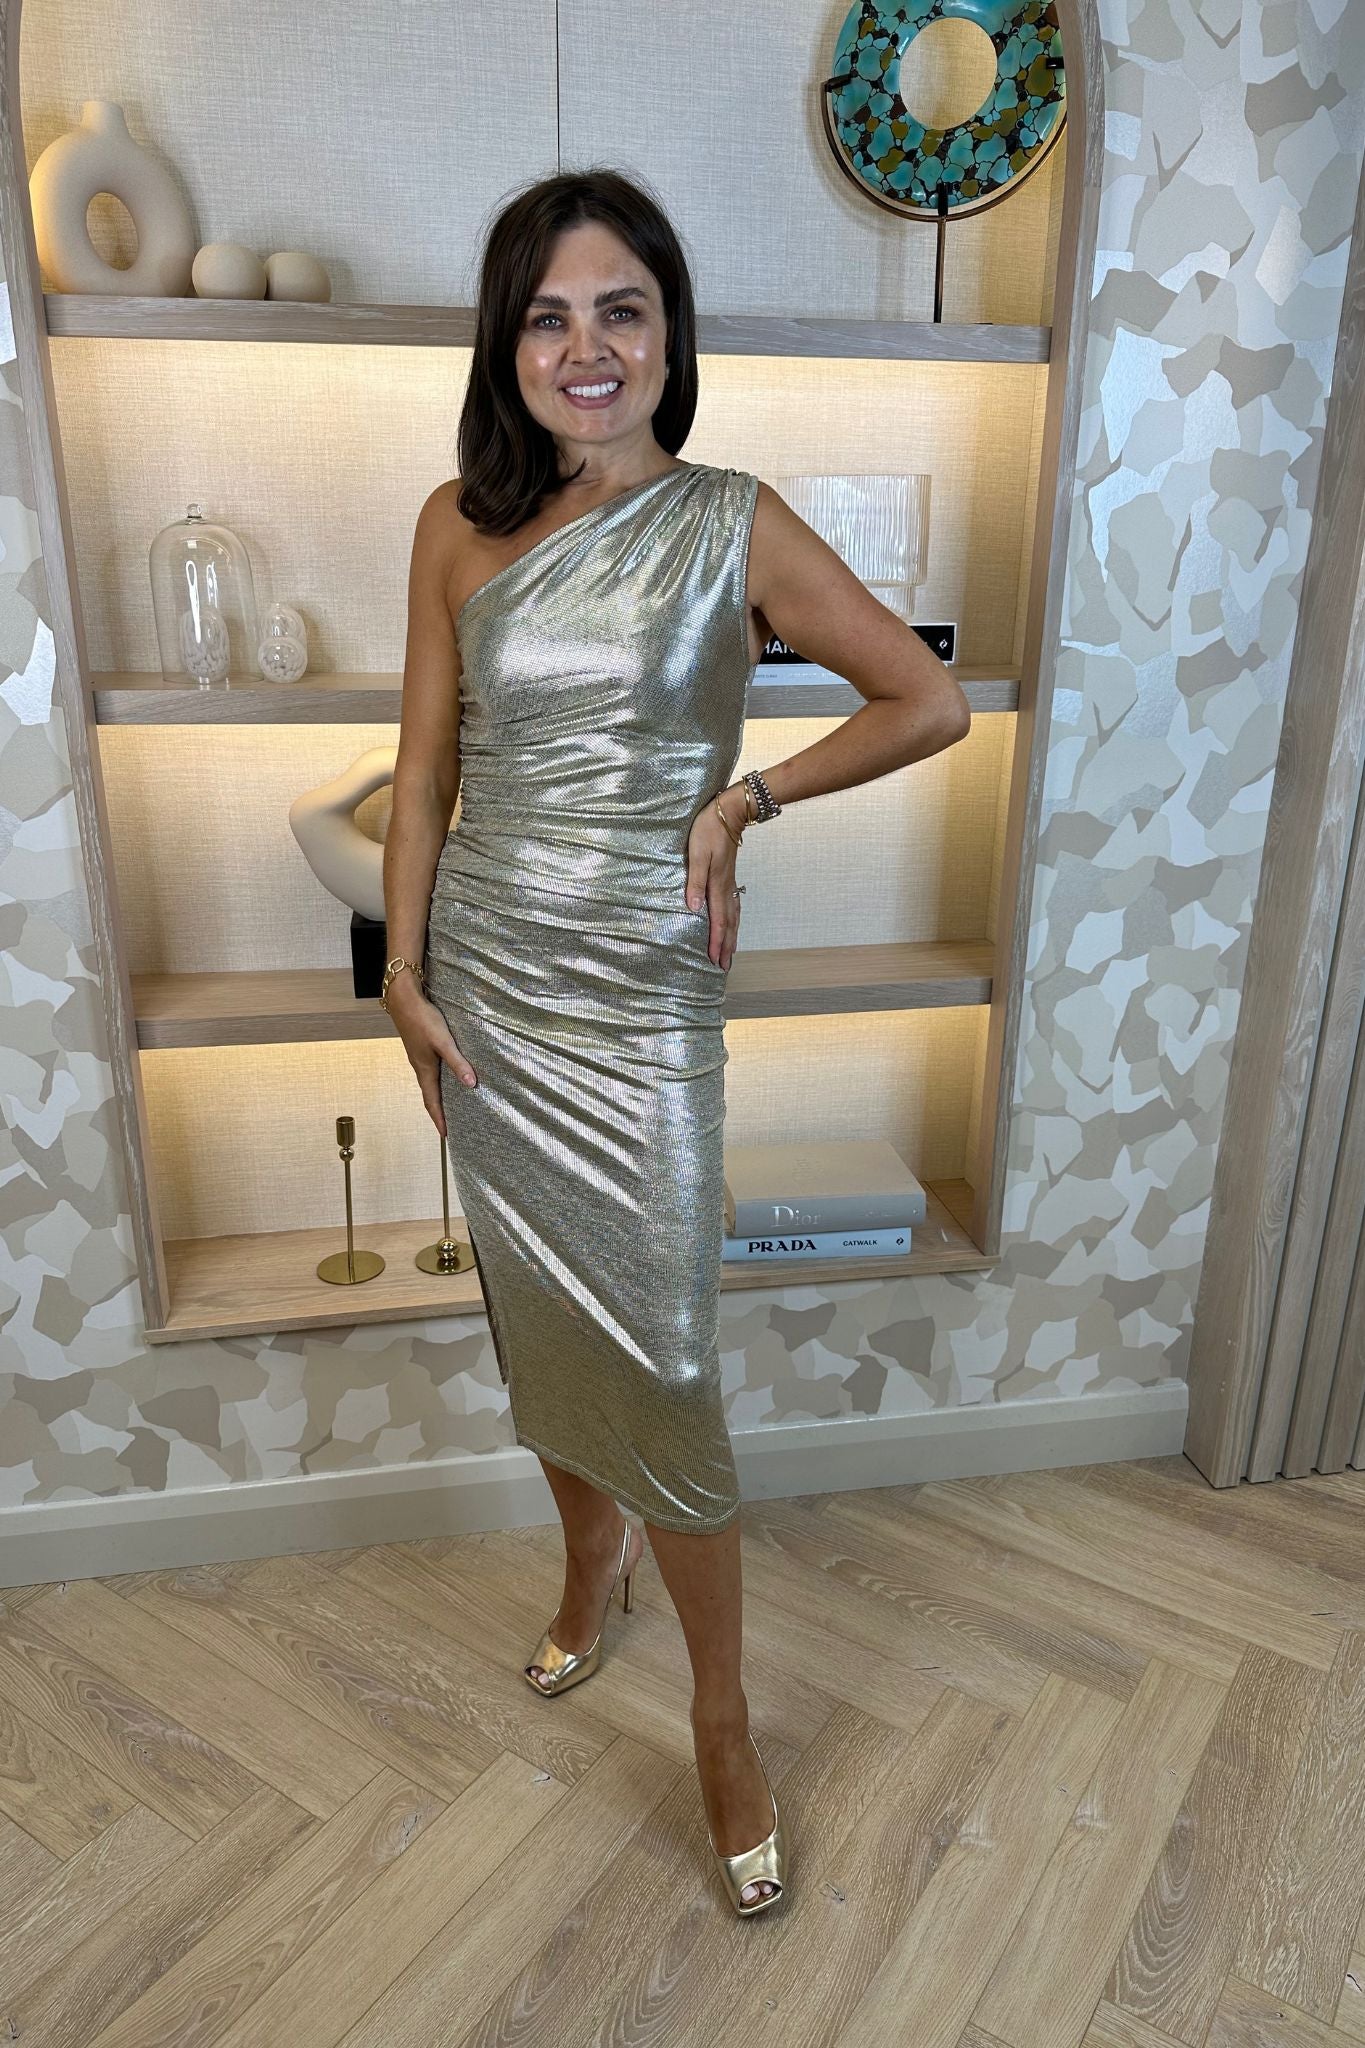 Holly Ruched Metallic Midi Dress In Gold - The Walk in Wardrobe